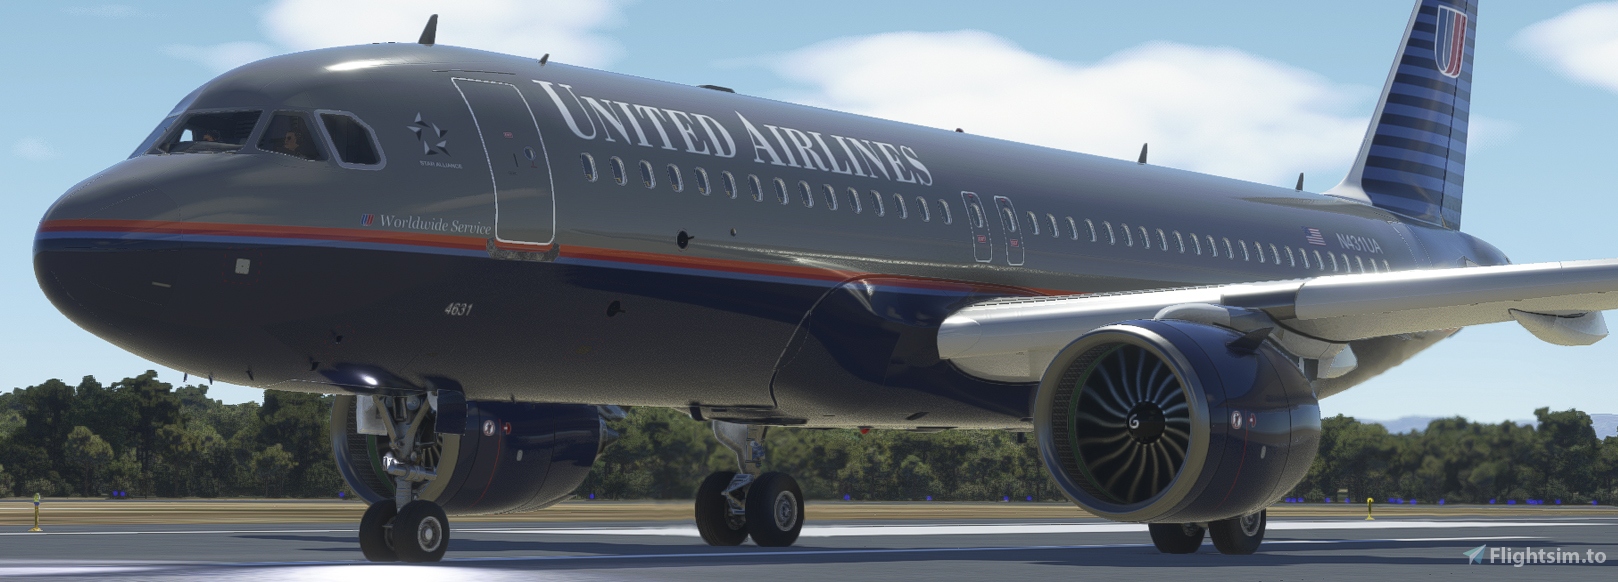 aerosoft airbus x extended united airlines livery